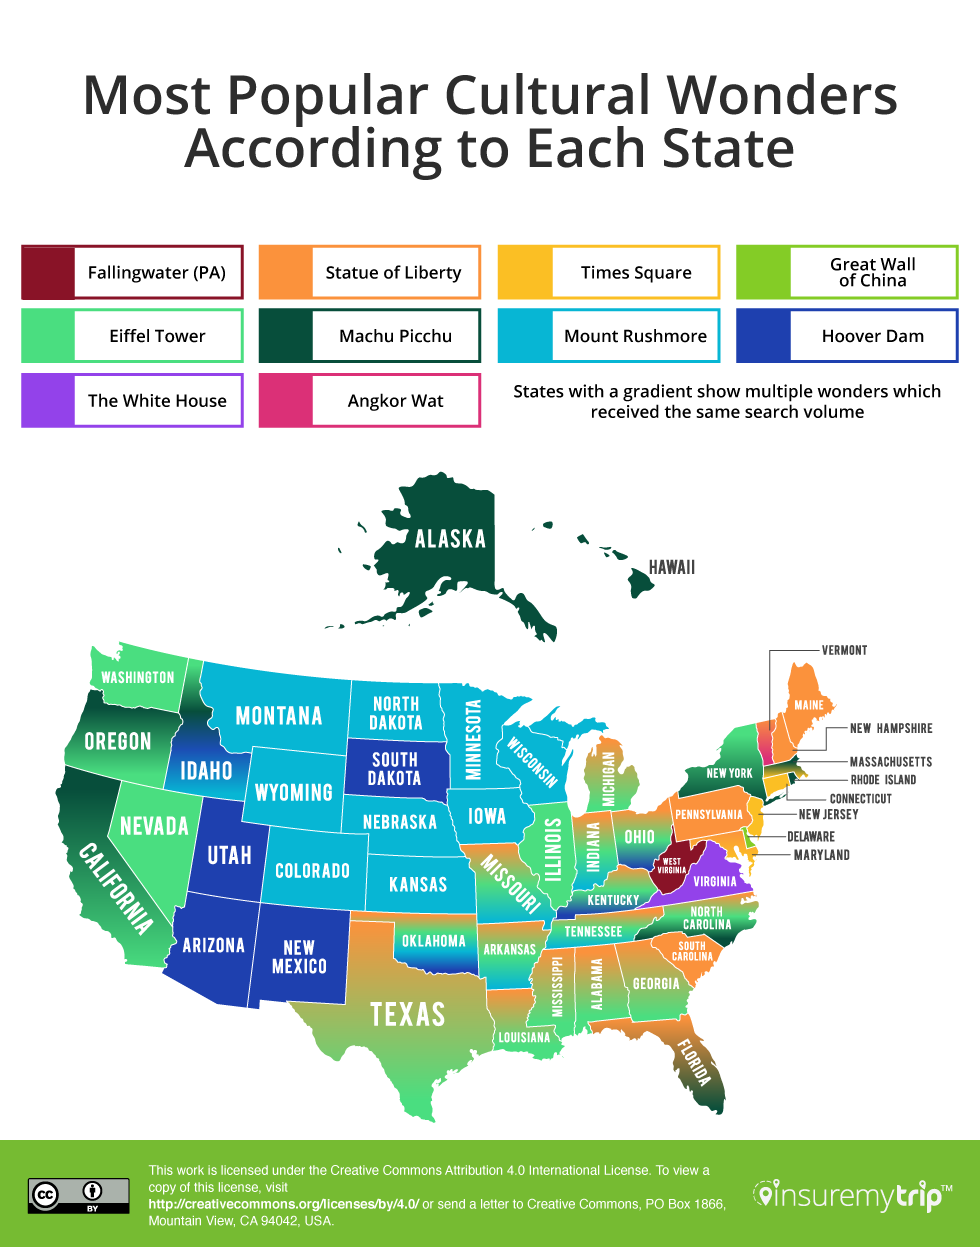 Most Popular Cultural Wonder Ranked by US State